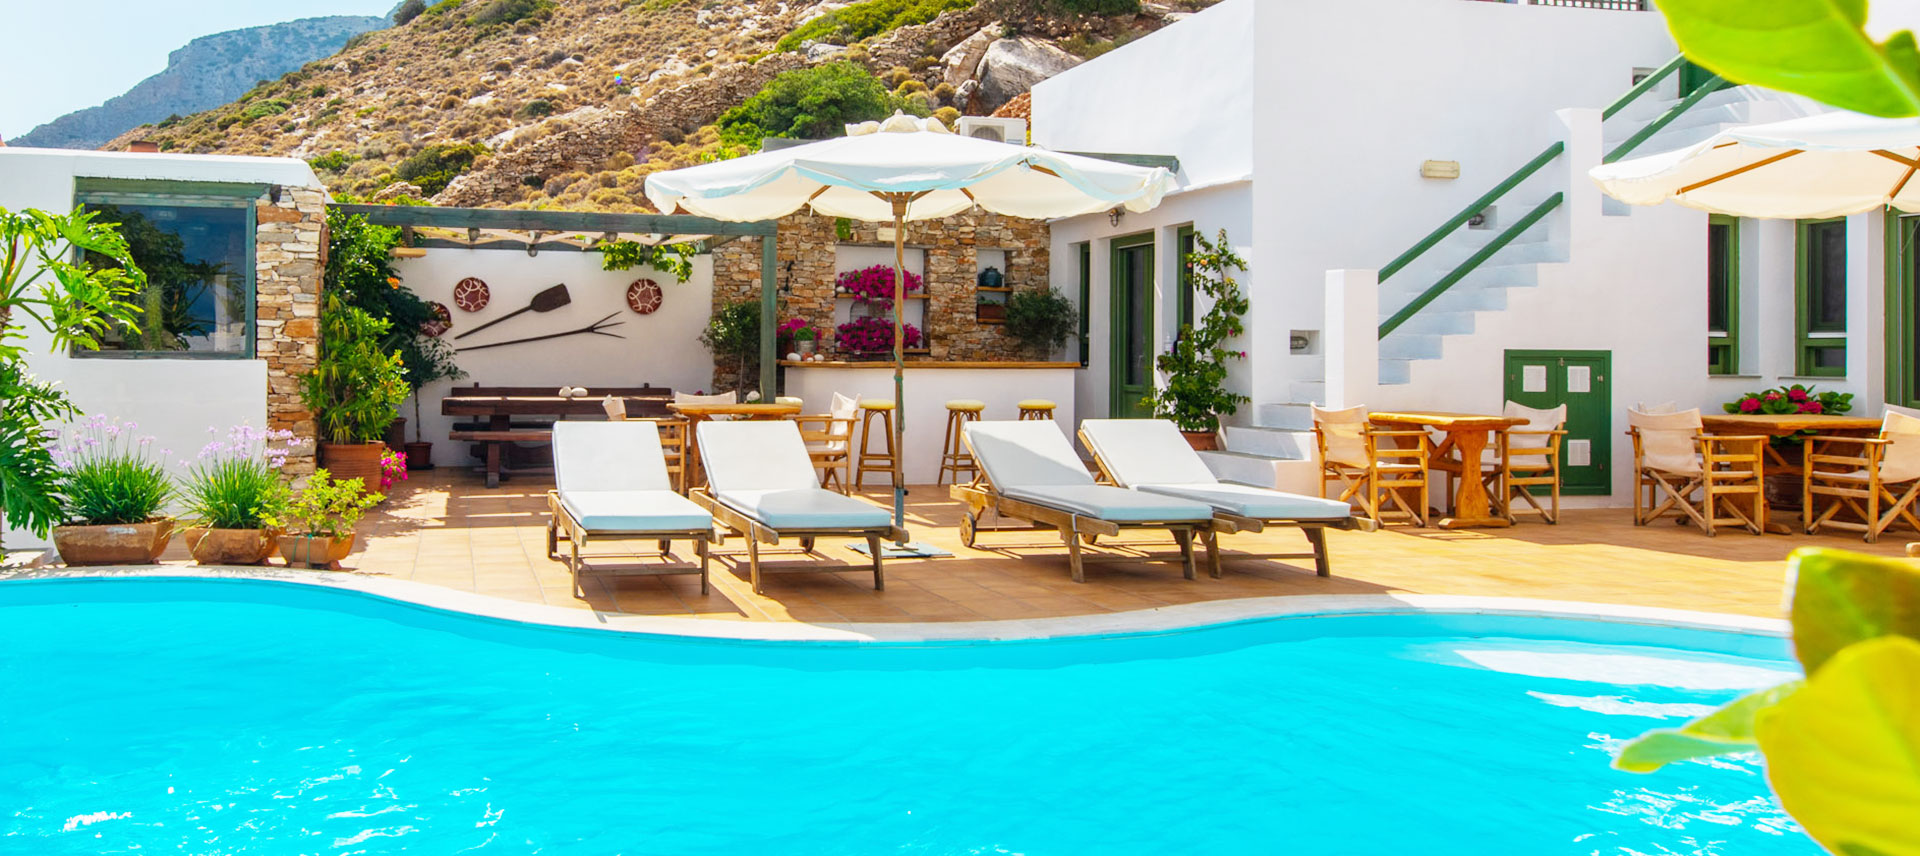 Contact and reservations for Margado accommodation at Sifnos